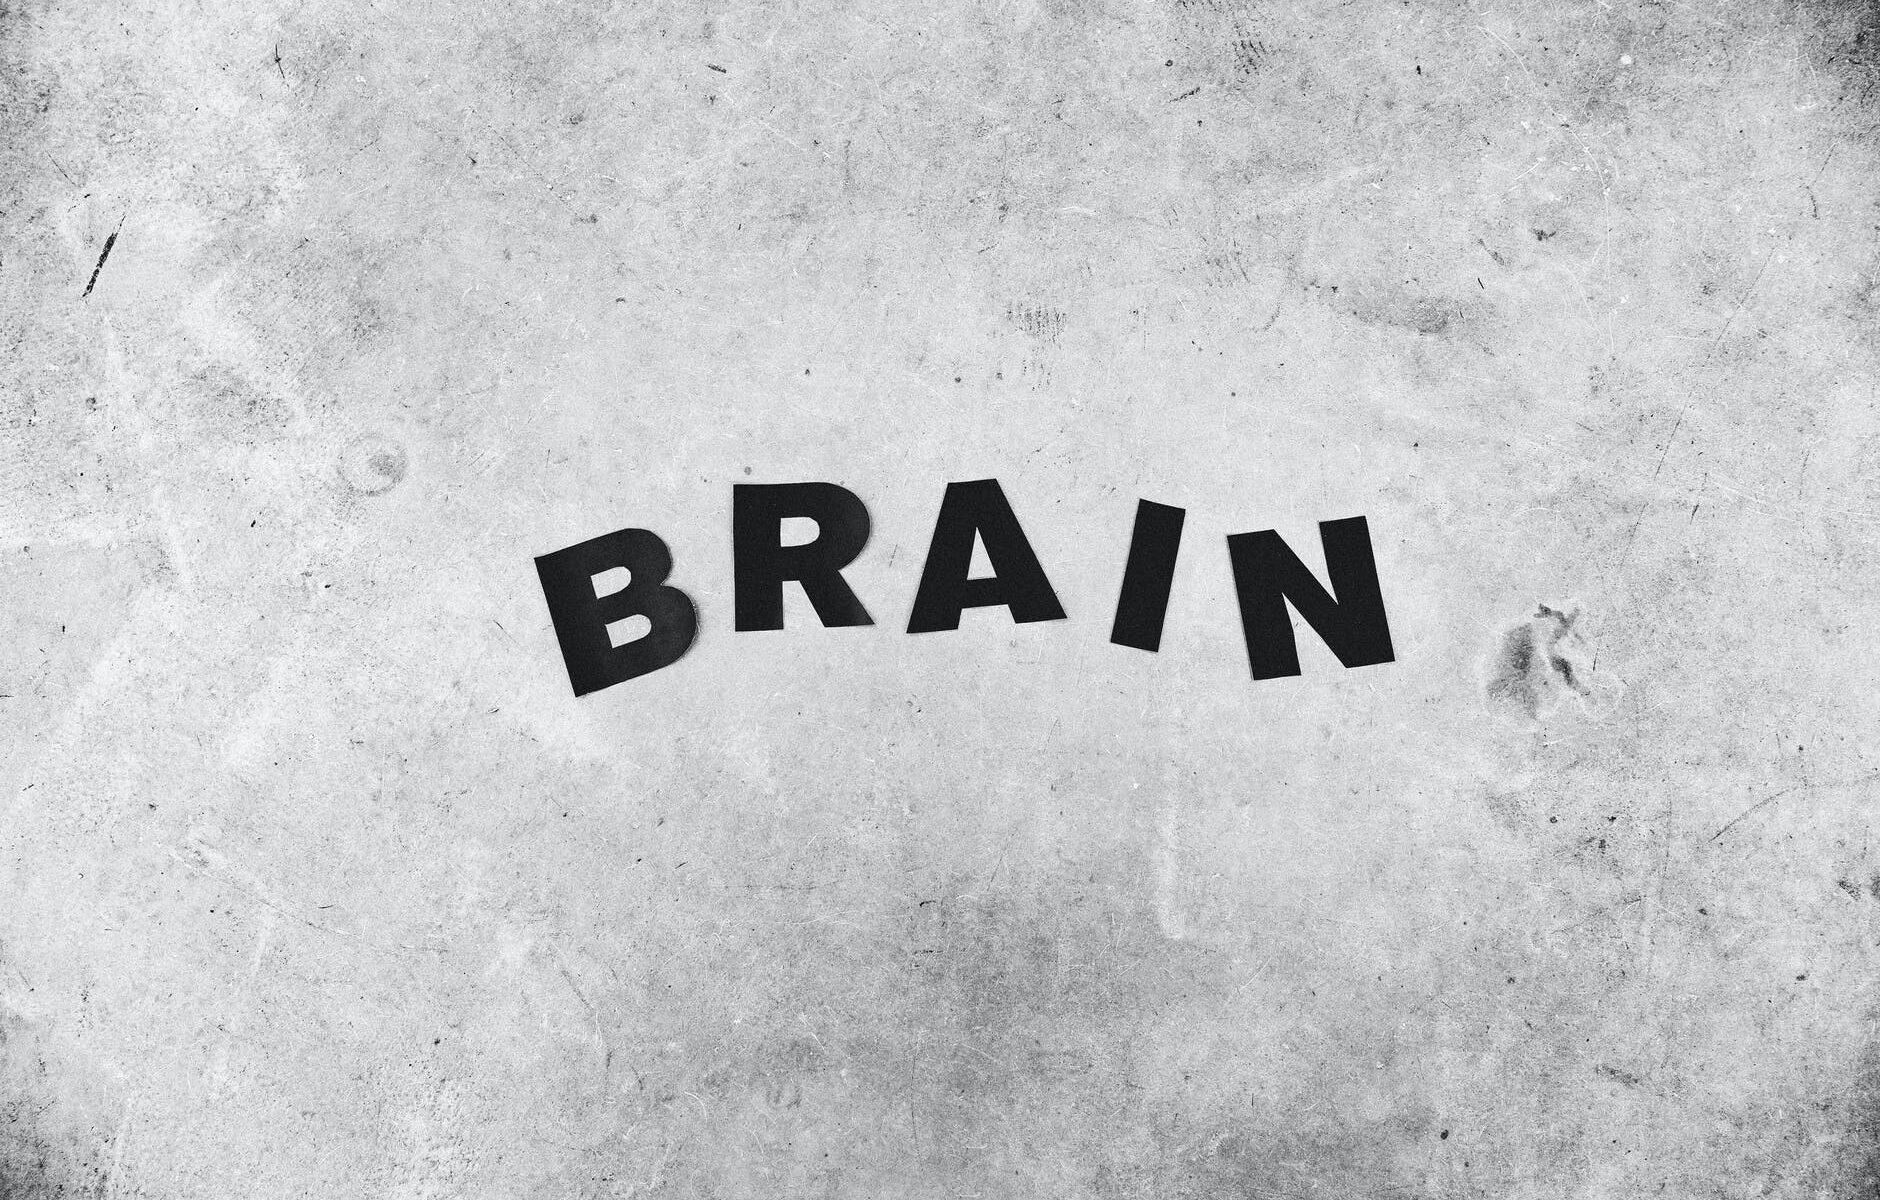 background of brain inscription on rugged wall